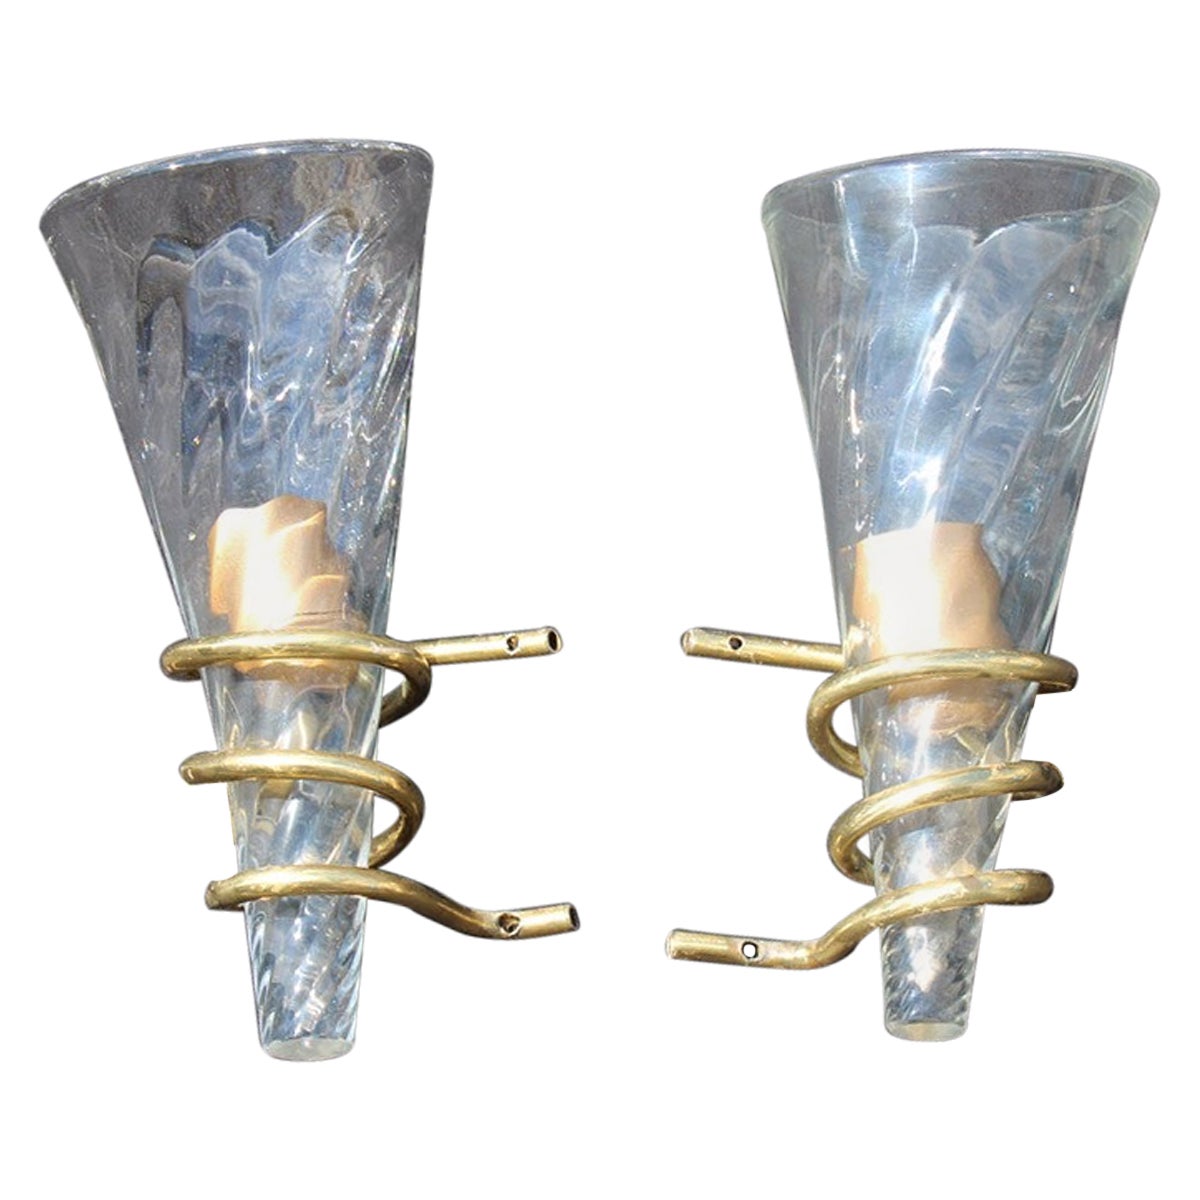 Pair of Spiral Wall Lamps in Murano Glass and Brass, Italy, 1970 For Sale